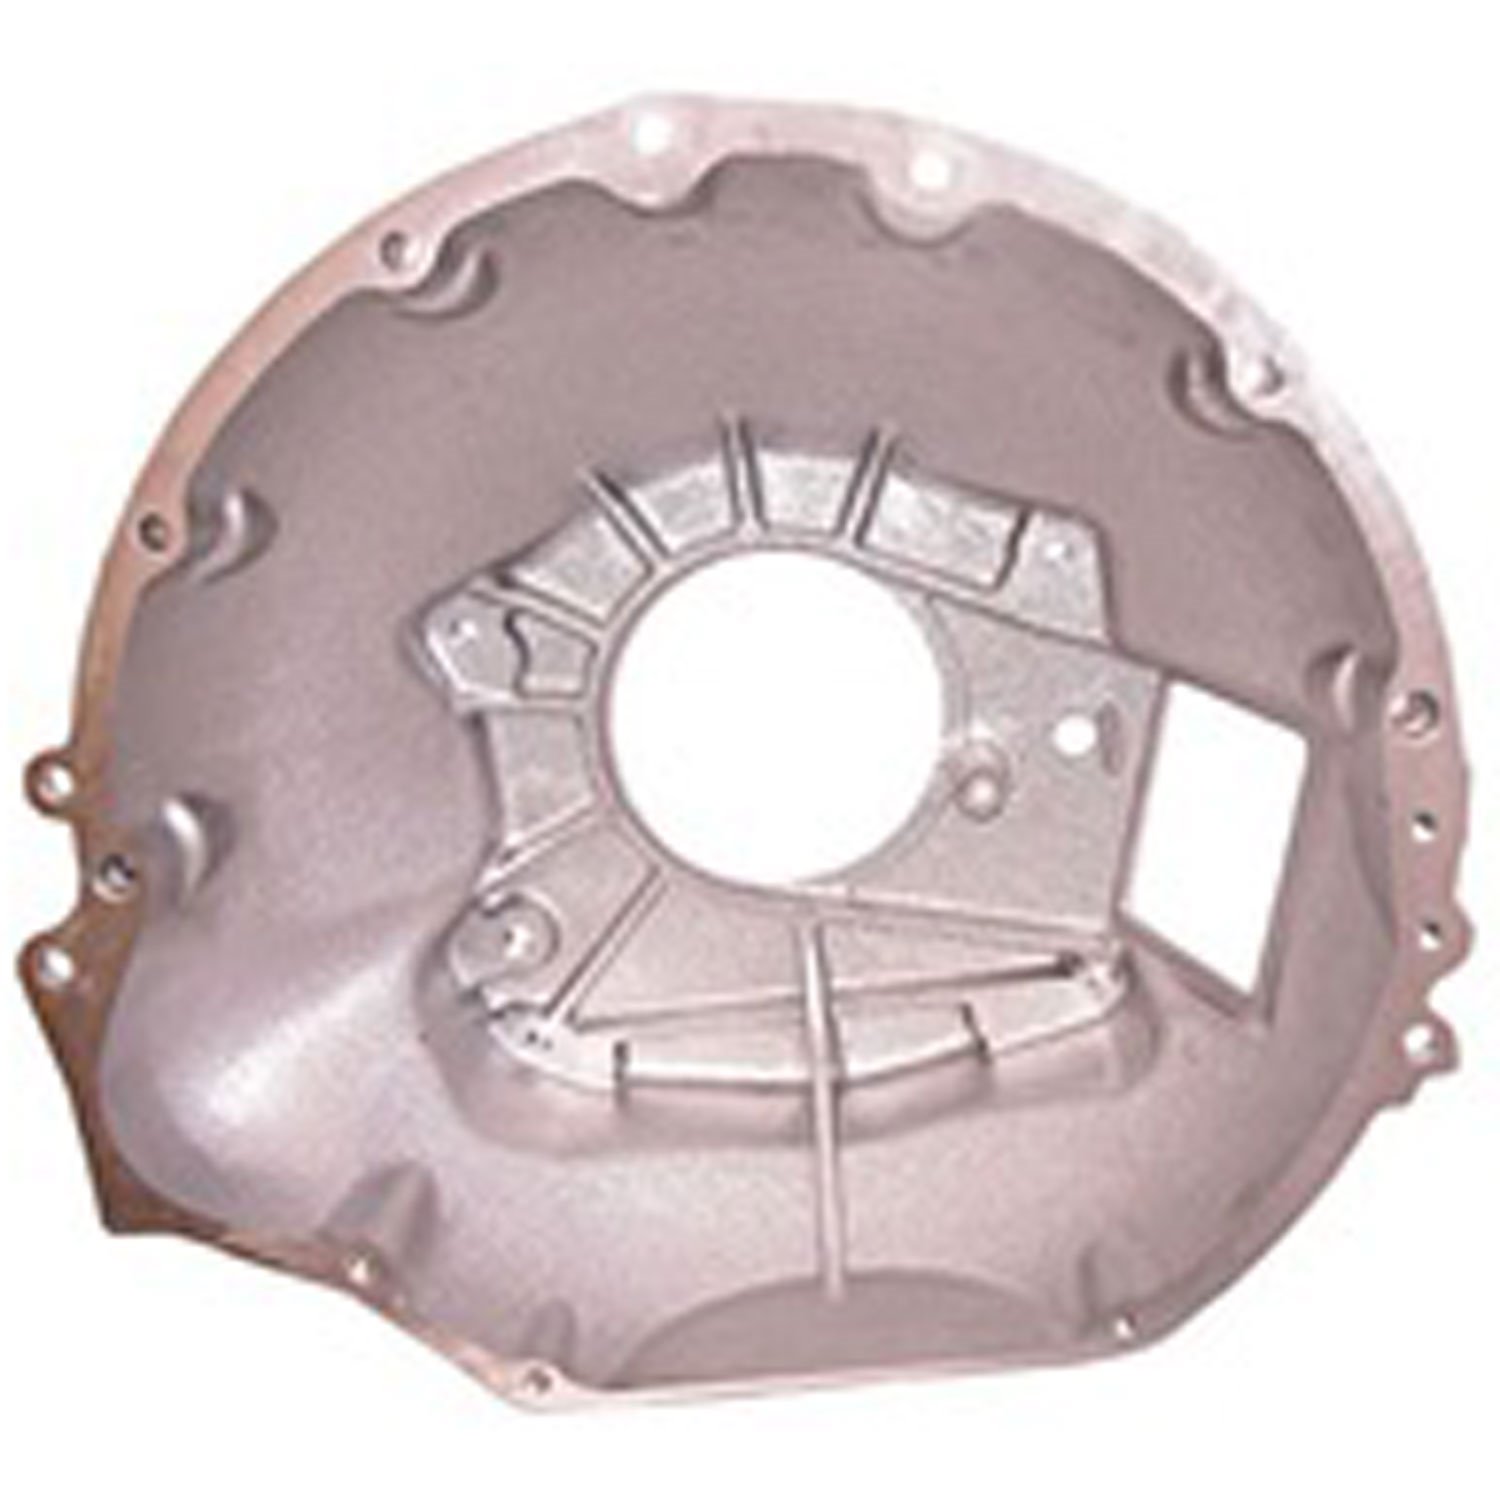 This transmission bell housing from Omix-ADA fits 76-79 Jeep CJ models with T150 and T18 transmissio